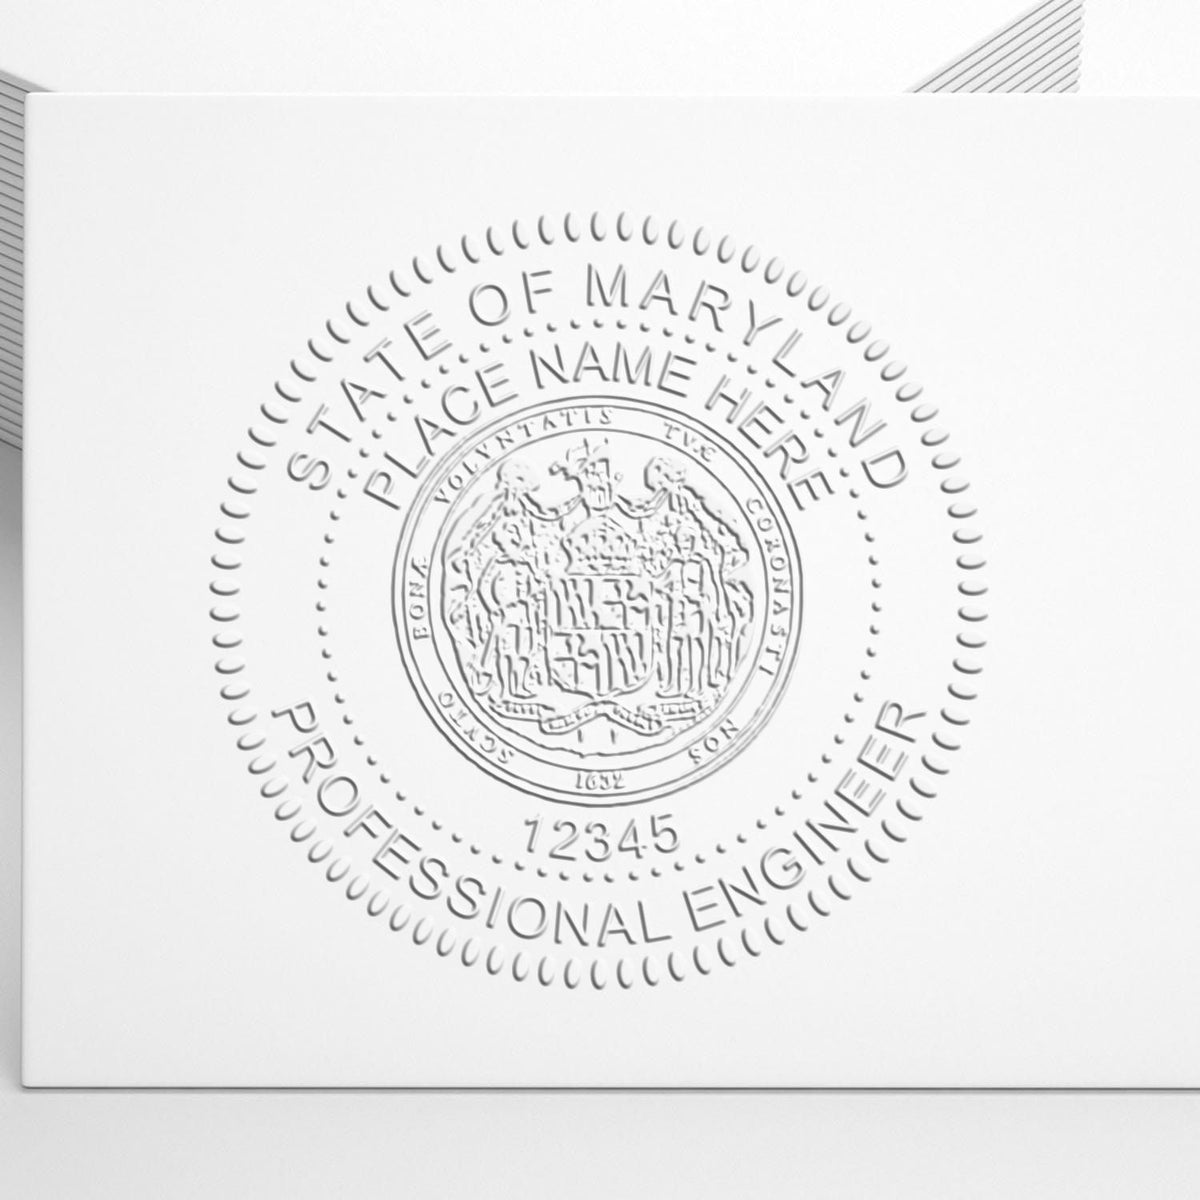 A photograph of the Hybrid Maryland Engineer Seal stamp impression reveals a vivid, professional image of the on paper.